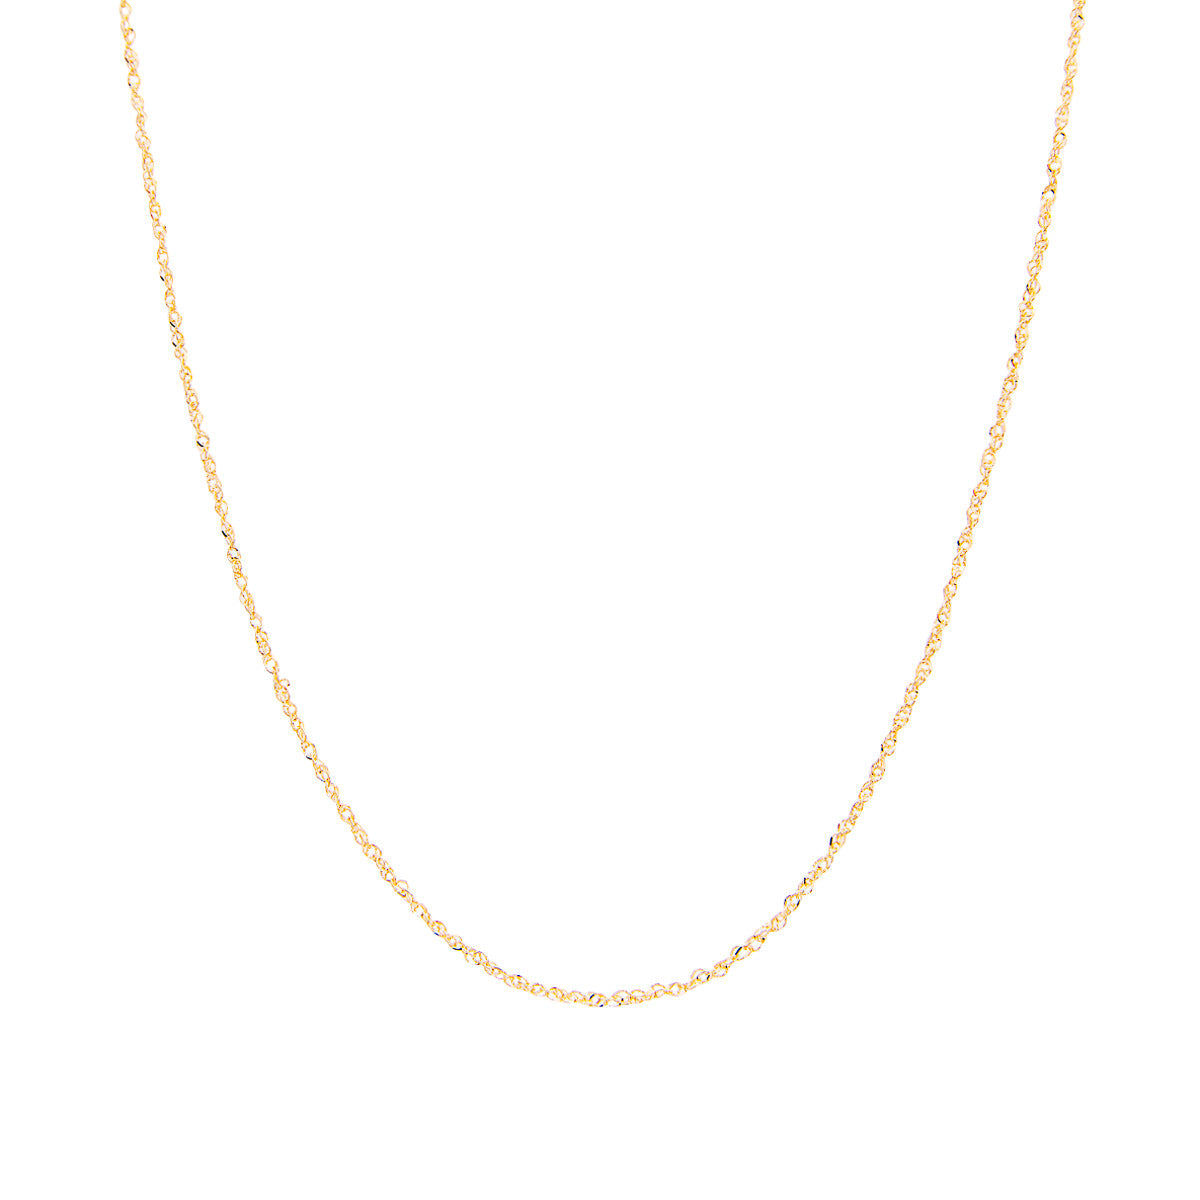 Fink's Jewelers 14K Gold 1.25mm Singapore Sparkle Chain Necklace